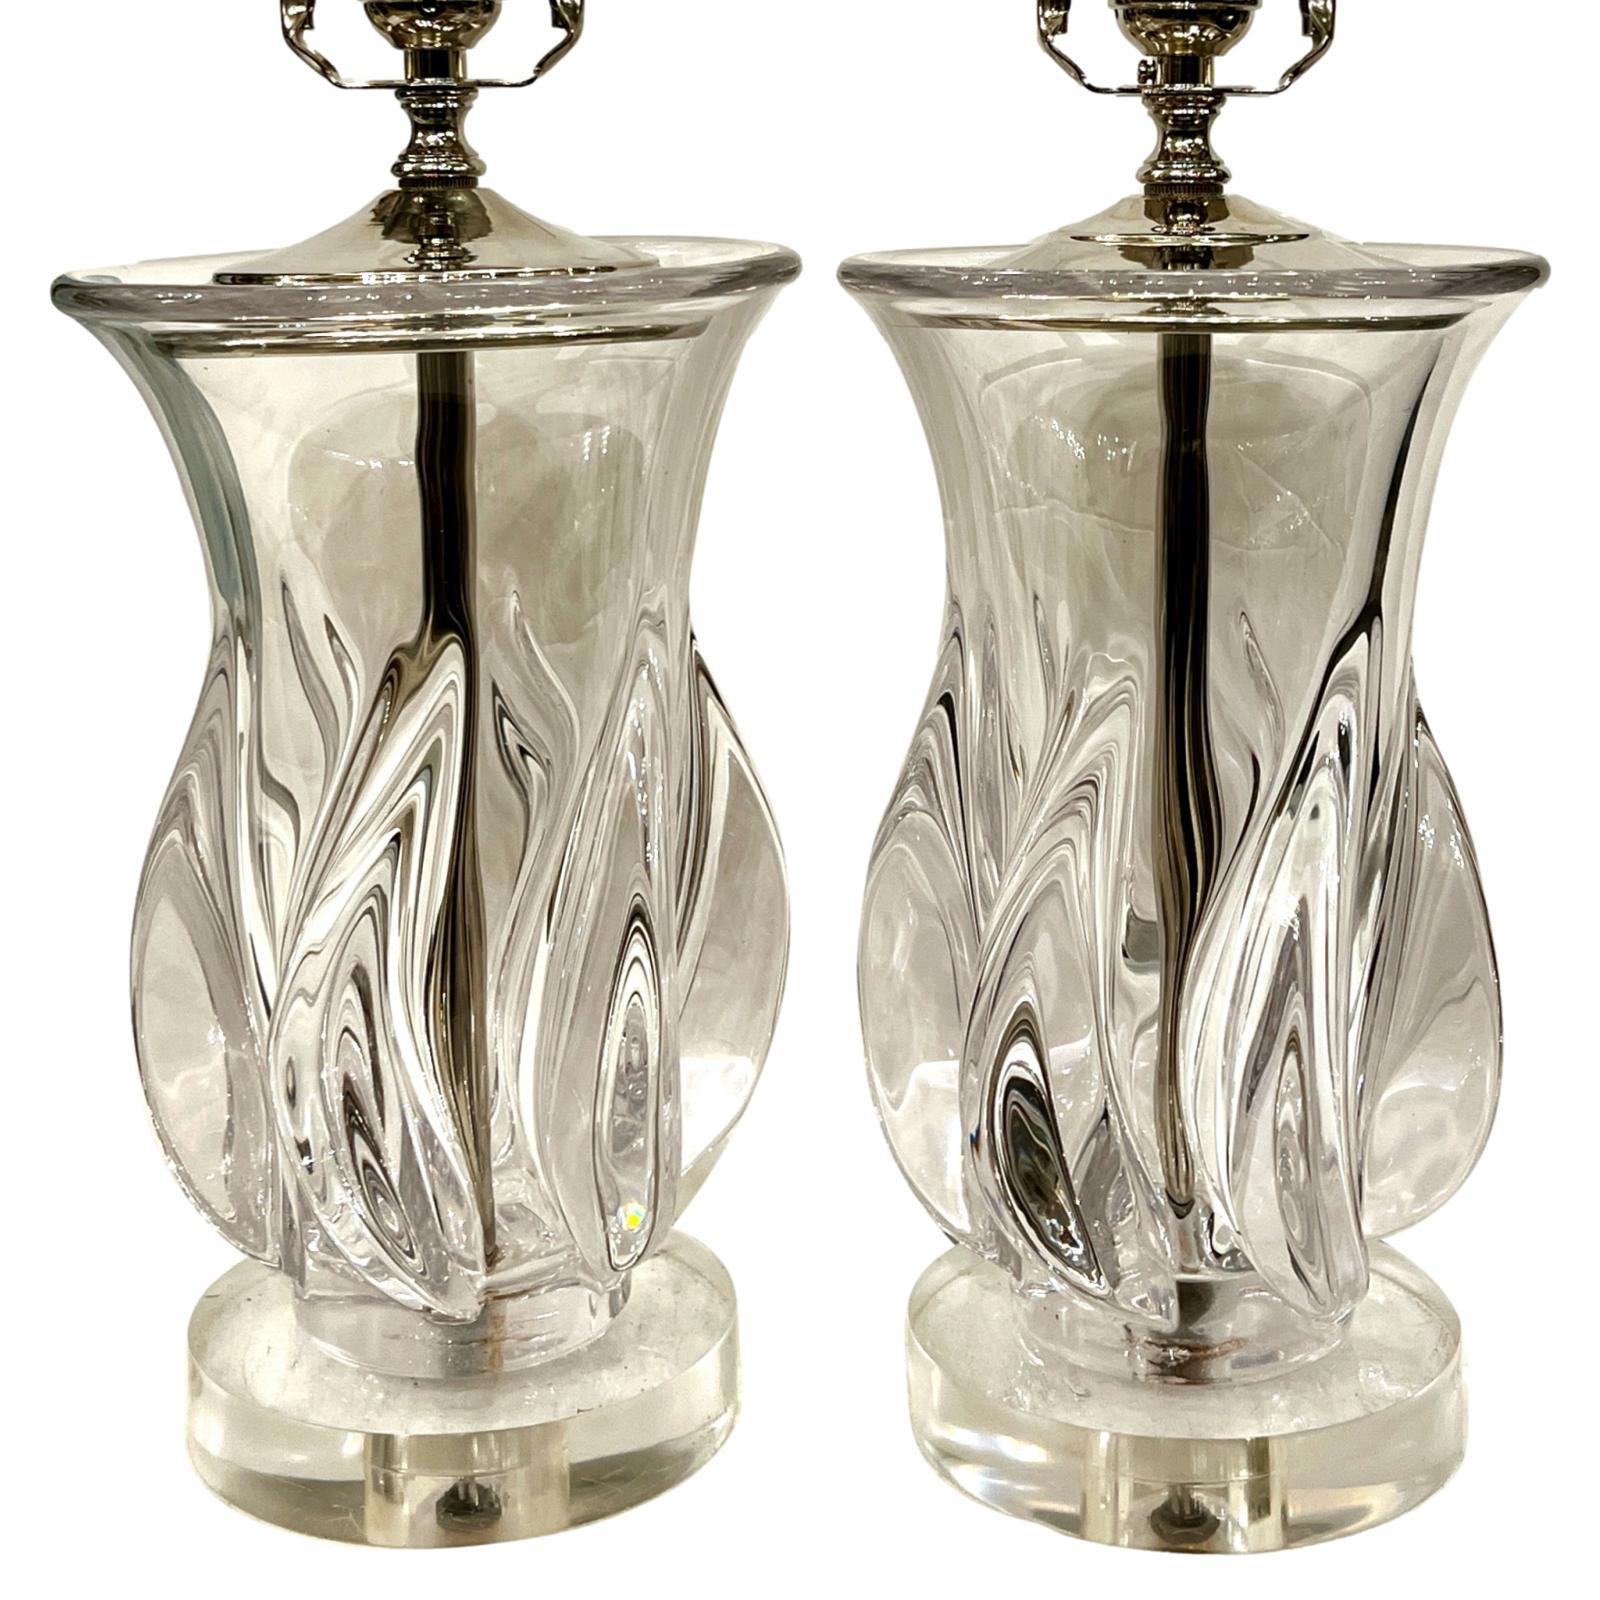 A pair of circa 1950's Italian hand-blown Murano glass table lamps with lucite bases.

Measurements:
Height of body: 11